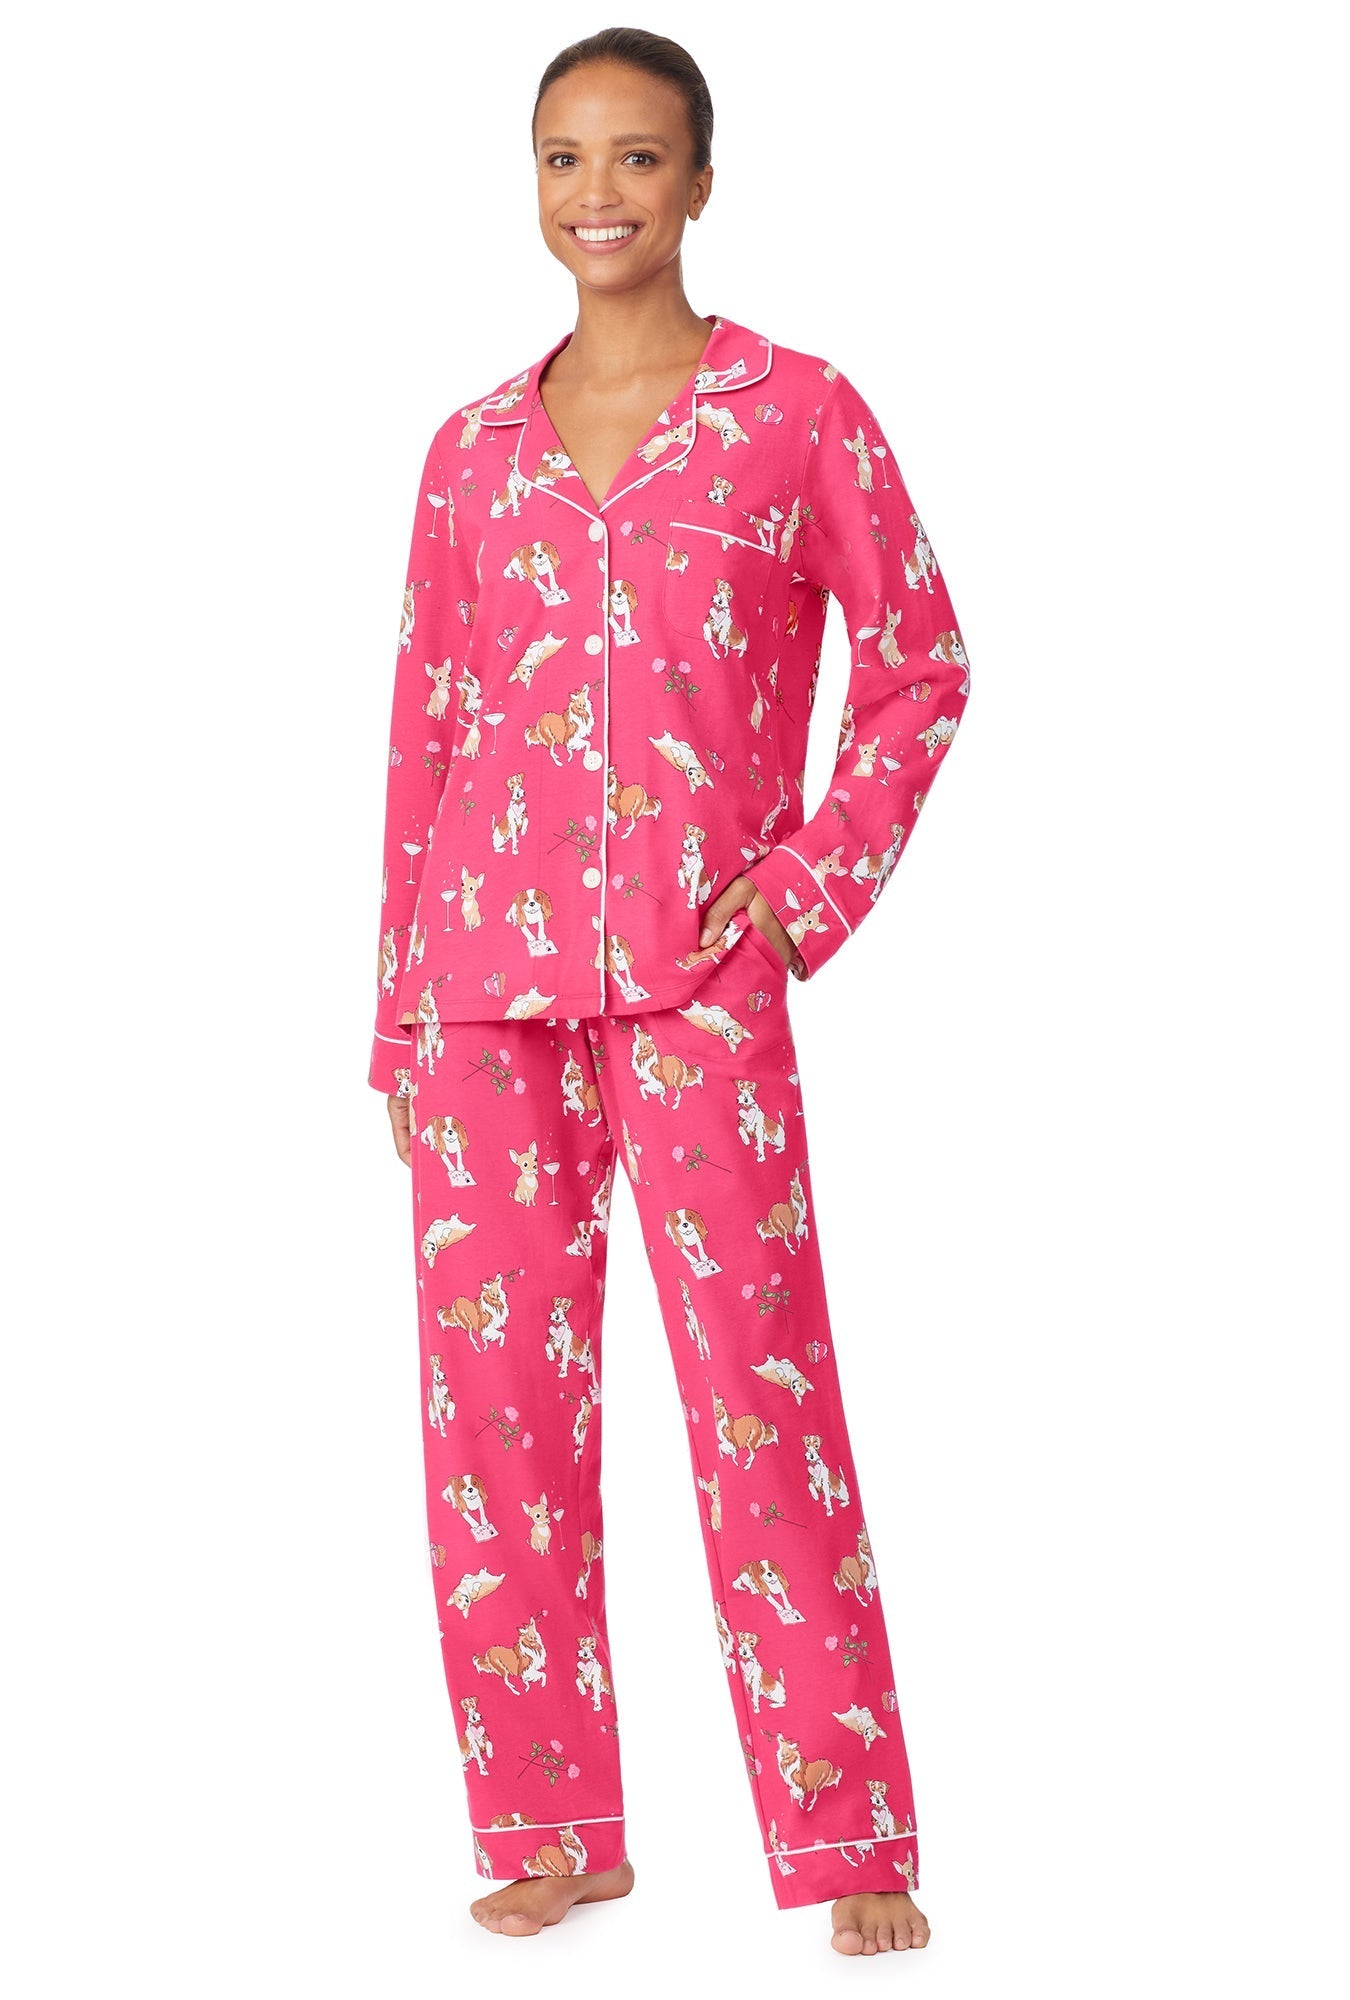 A lady wearing a pink long sleeve pj set with cheering pets pattern.